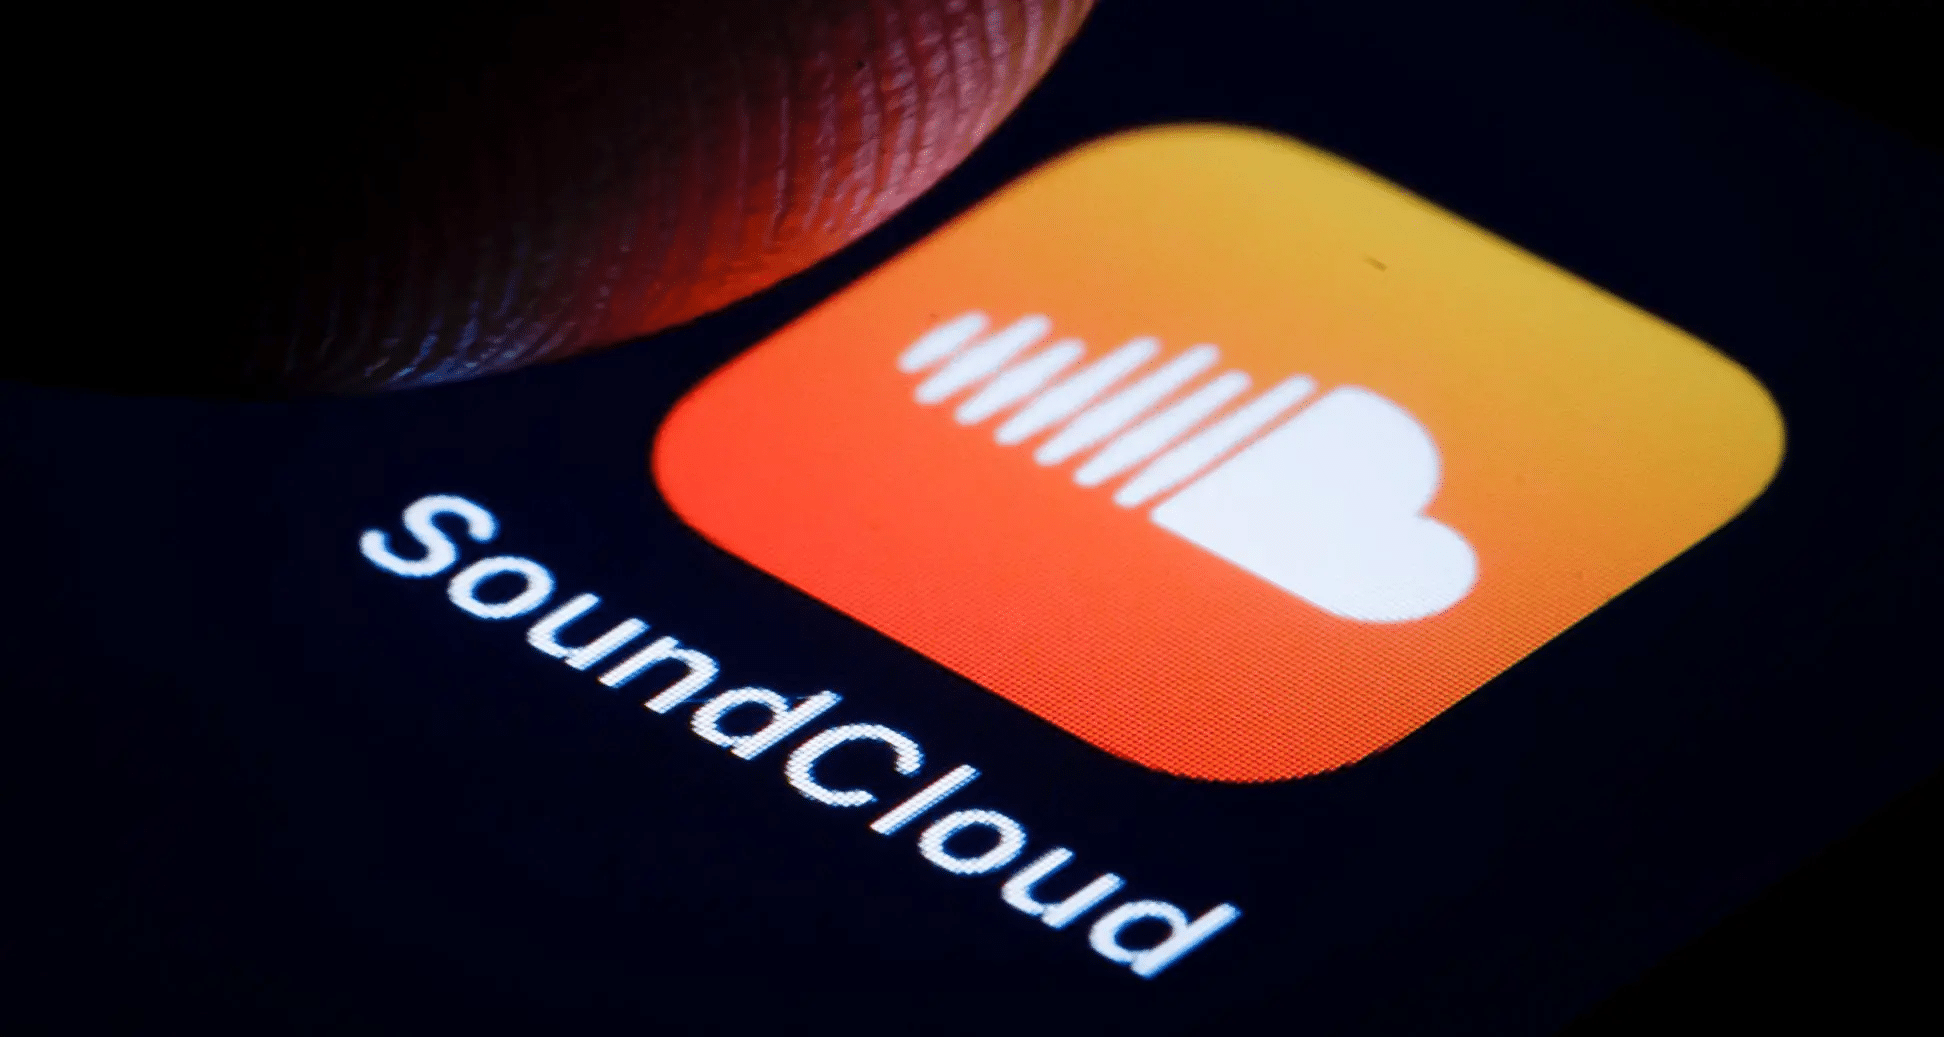 Benefits of promoting your content on SoundCloud